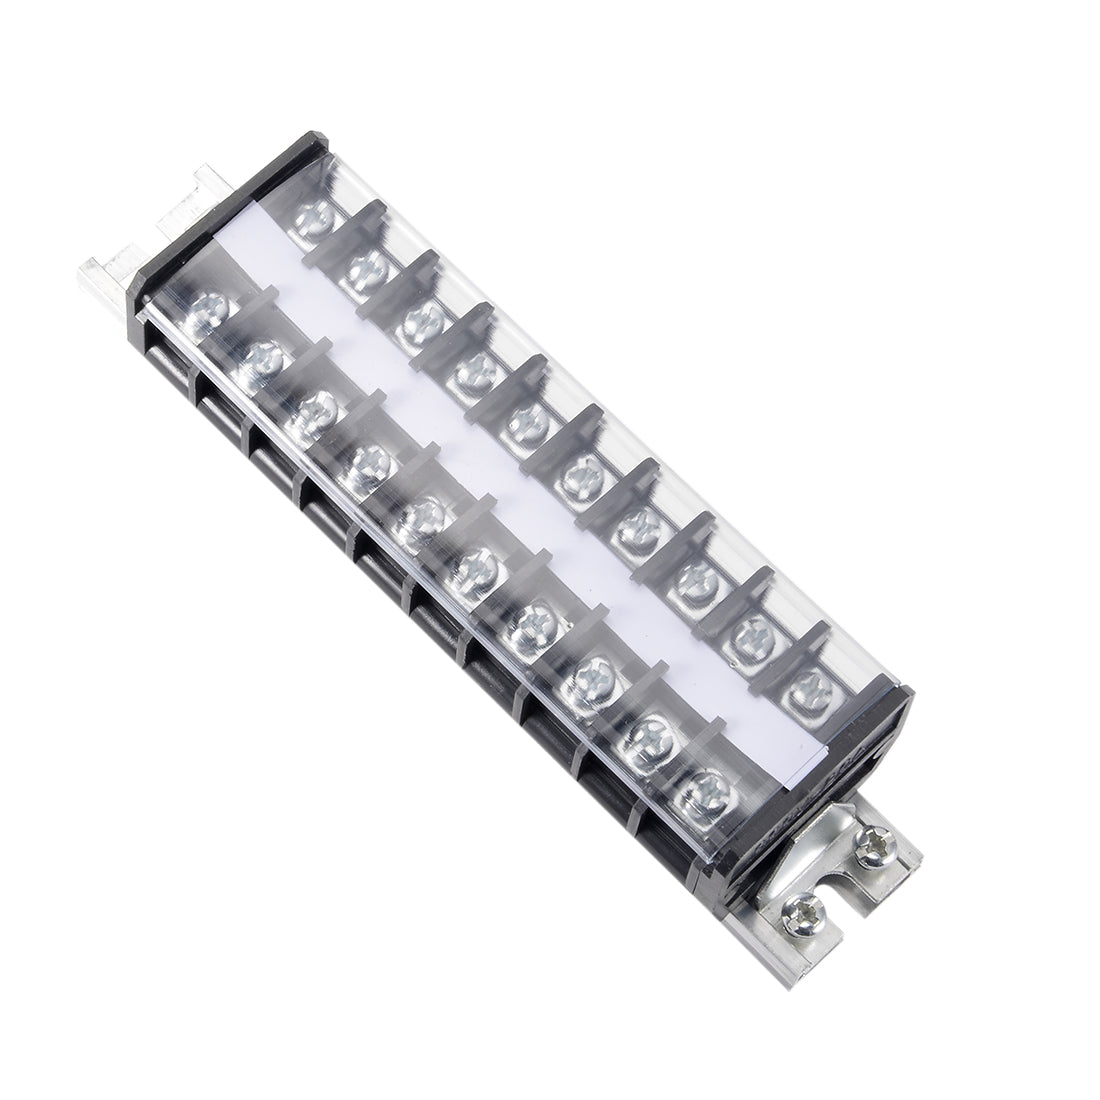 uxcell Uxcell Barrier Terminal Strip Block 660V 20A Dual Rows 10P DIN Rail Base Screw Connector